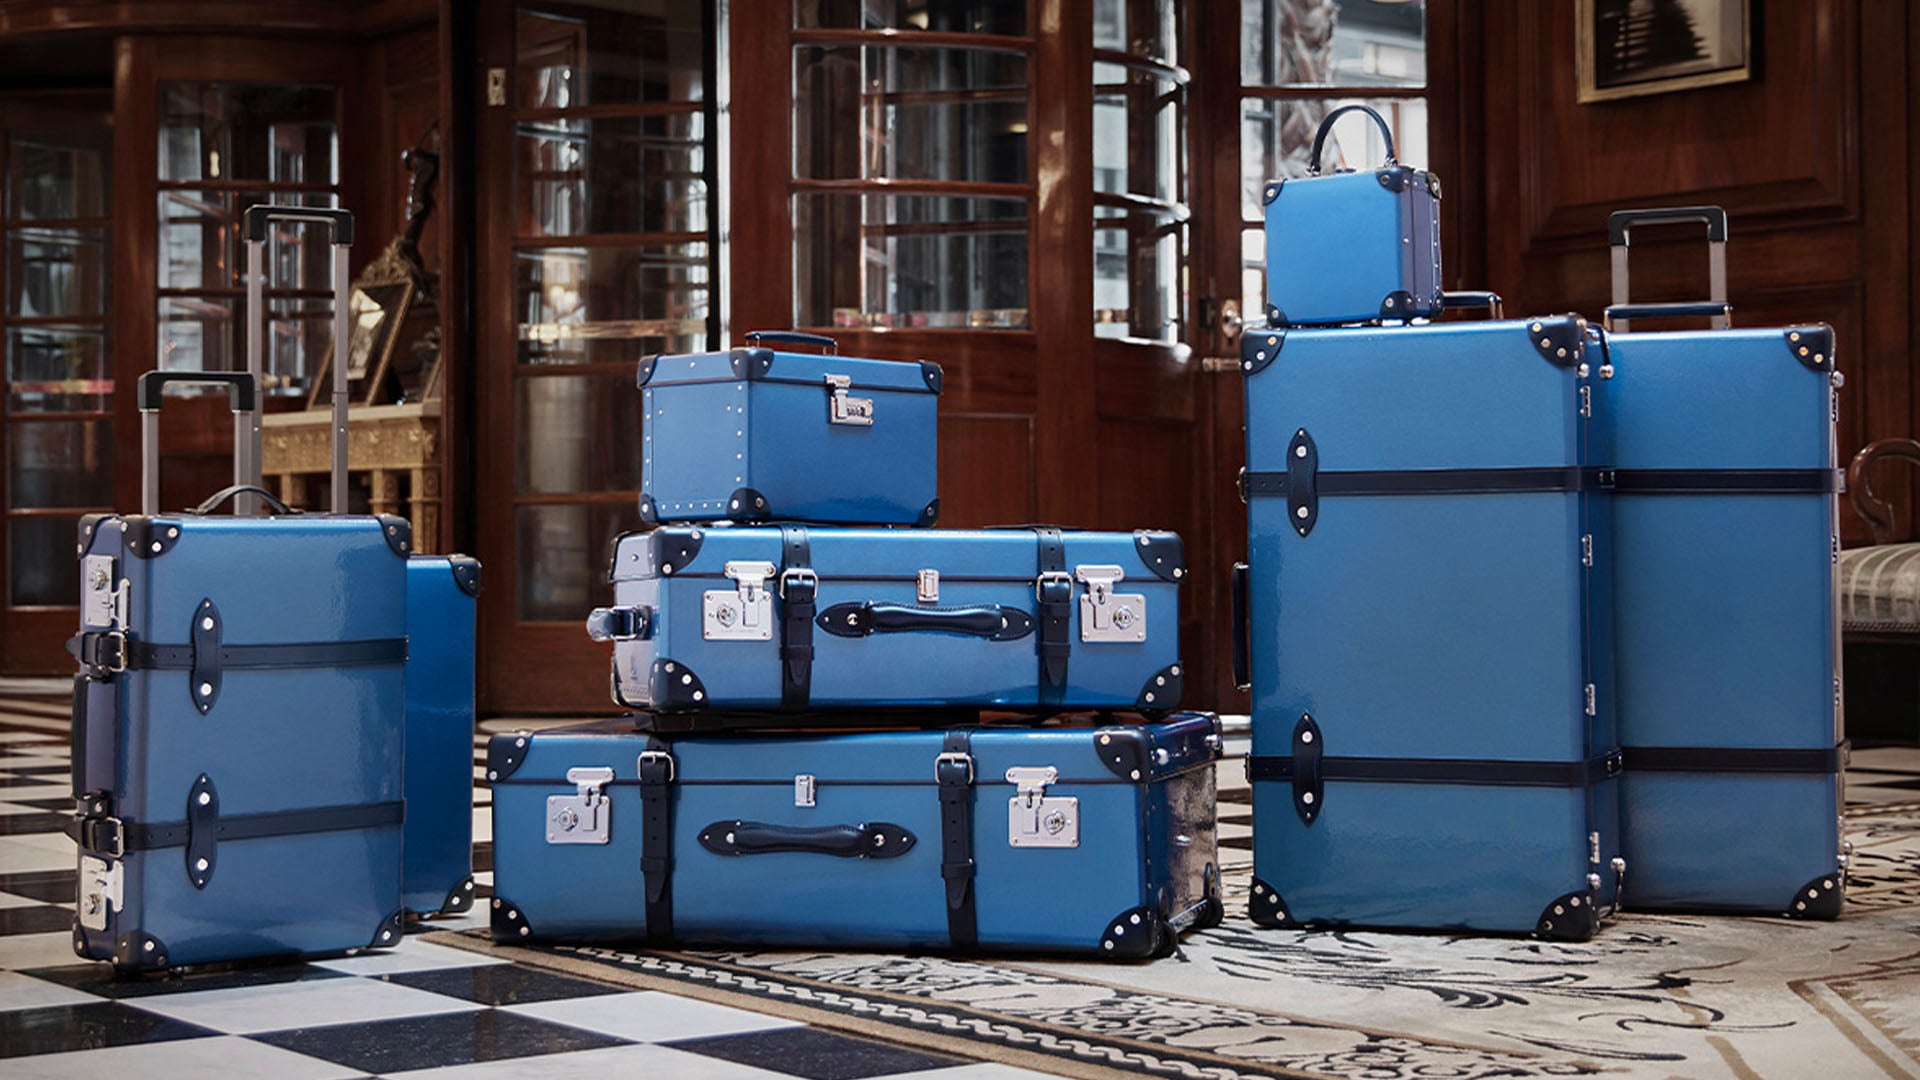 How Much is the World's Most Expensive Luggage?